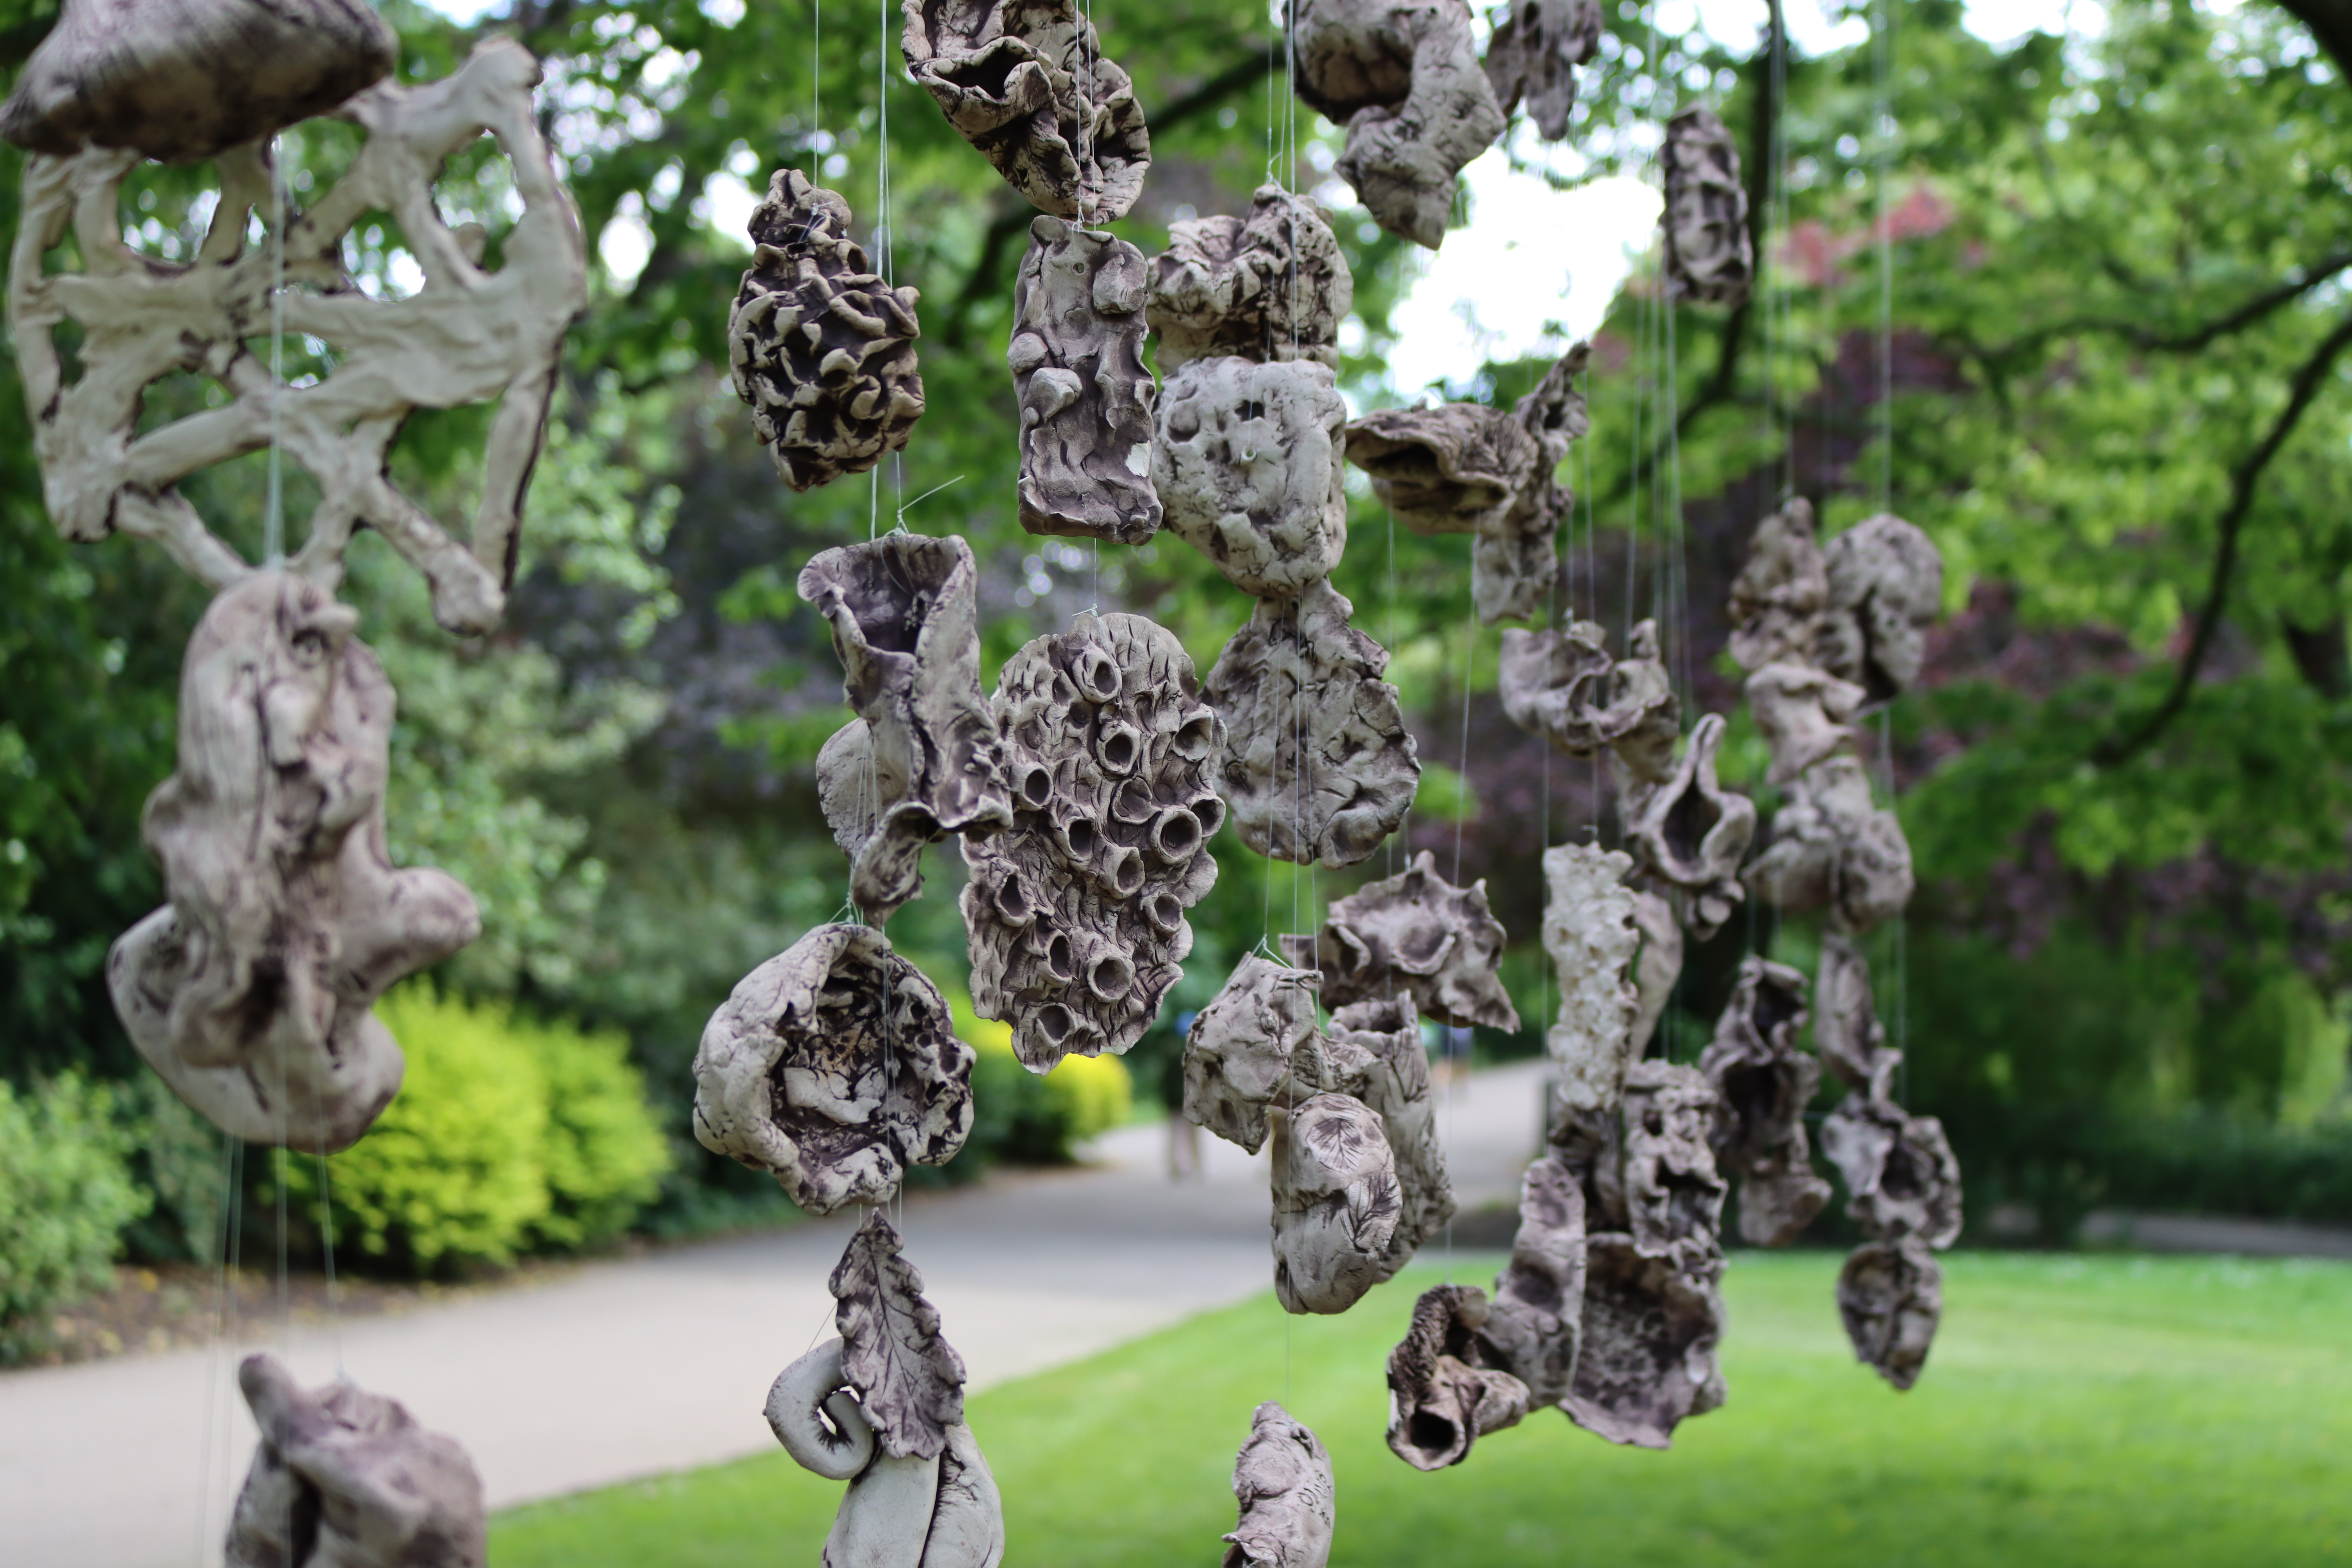 Clay artwork hanging from a tree in Waterlow Park